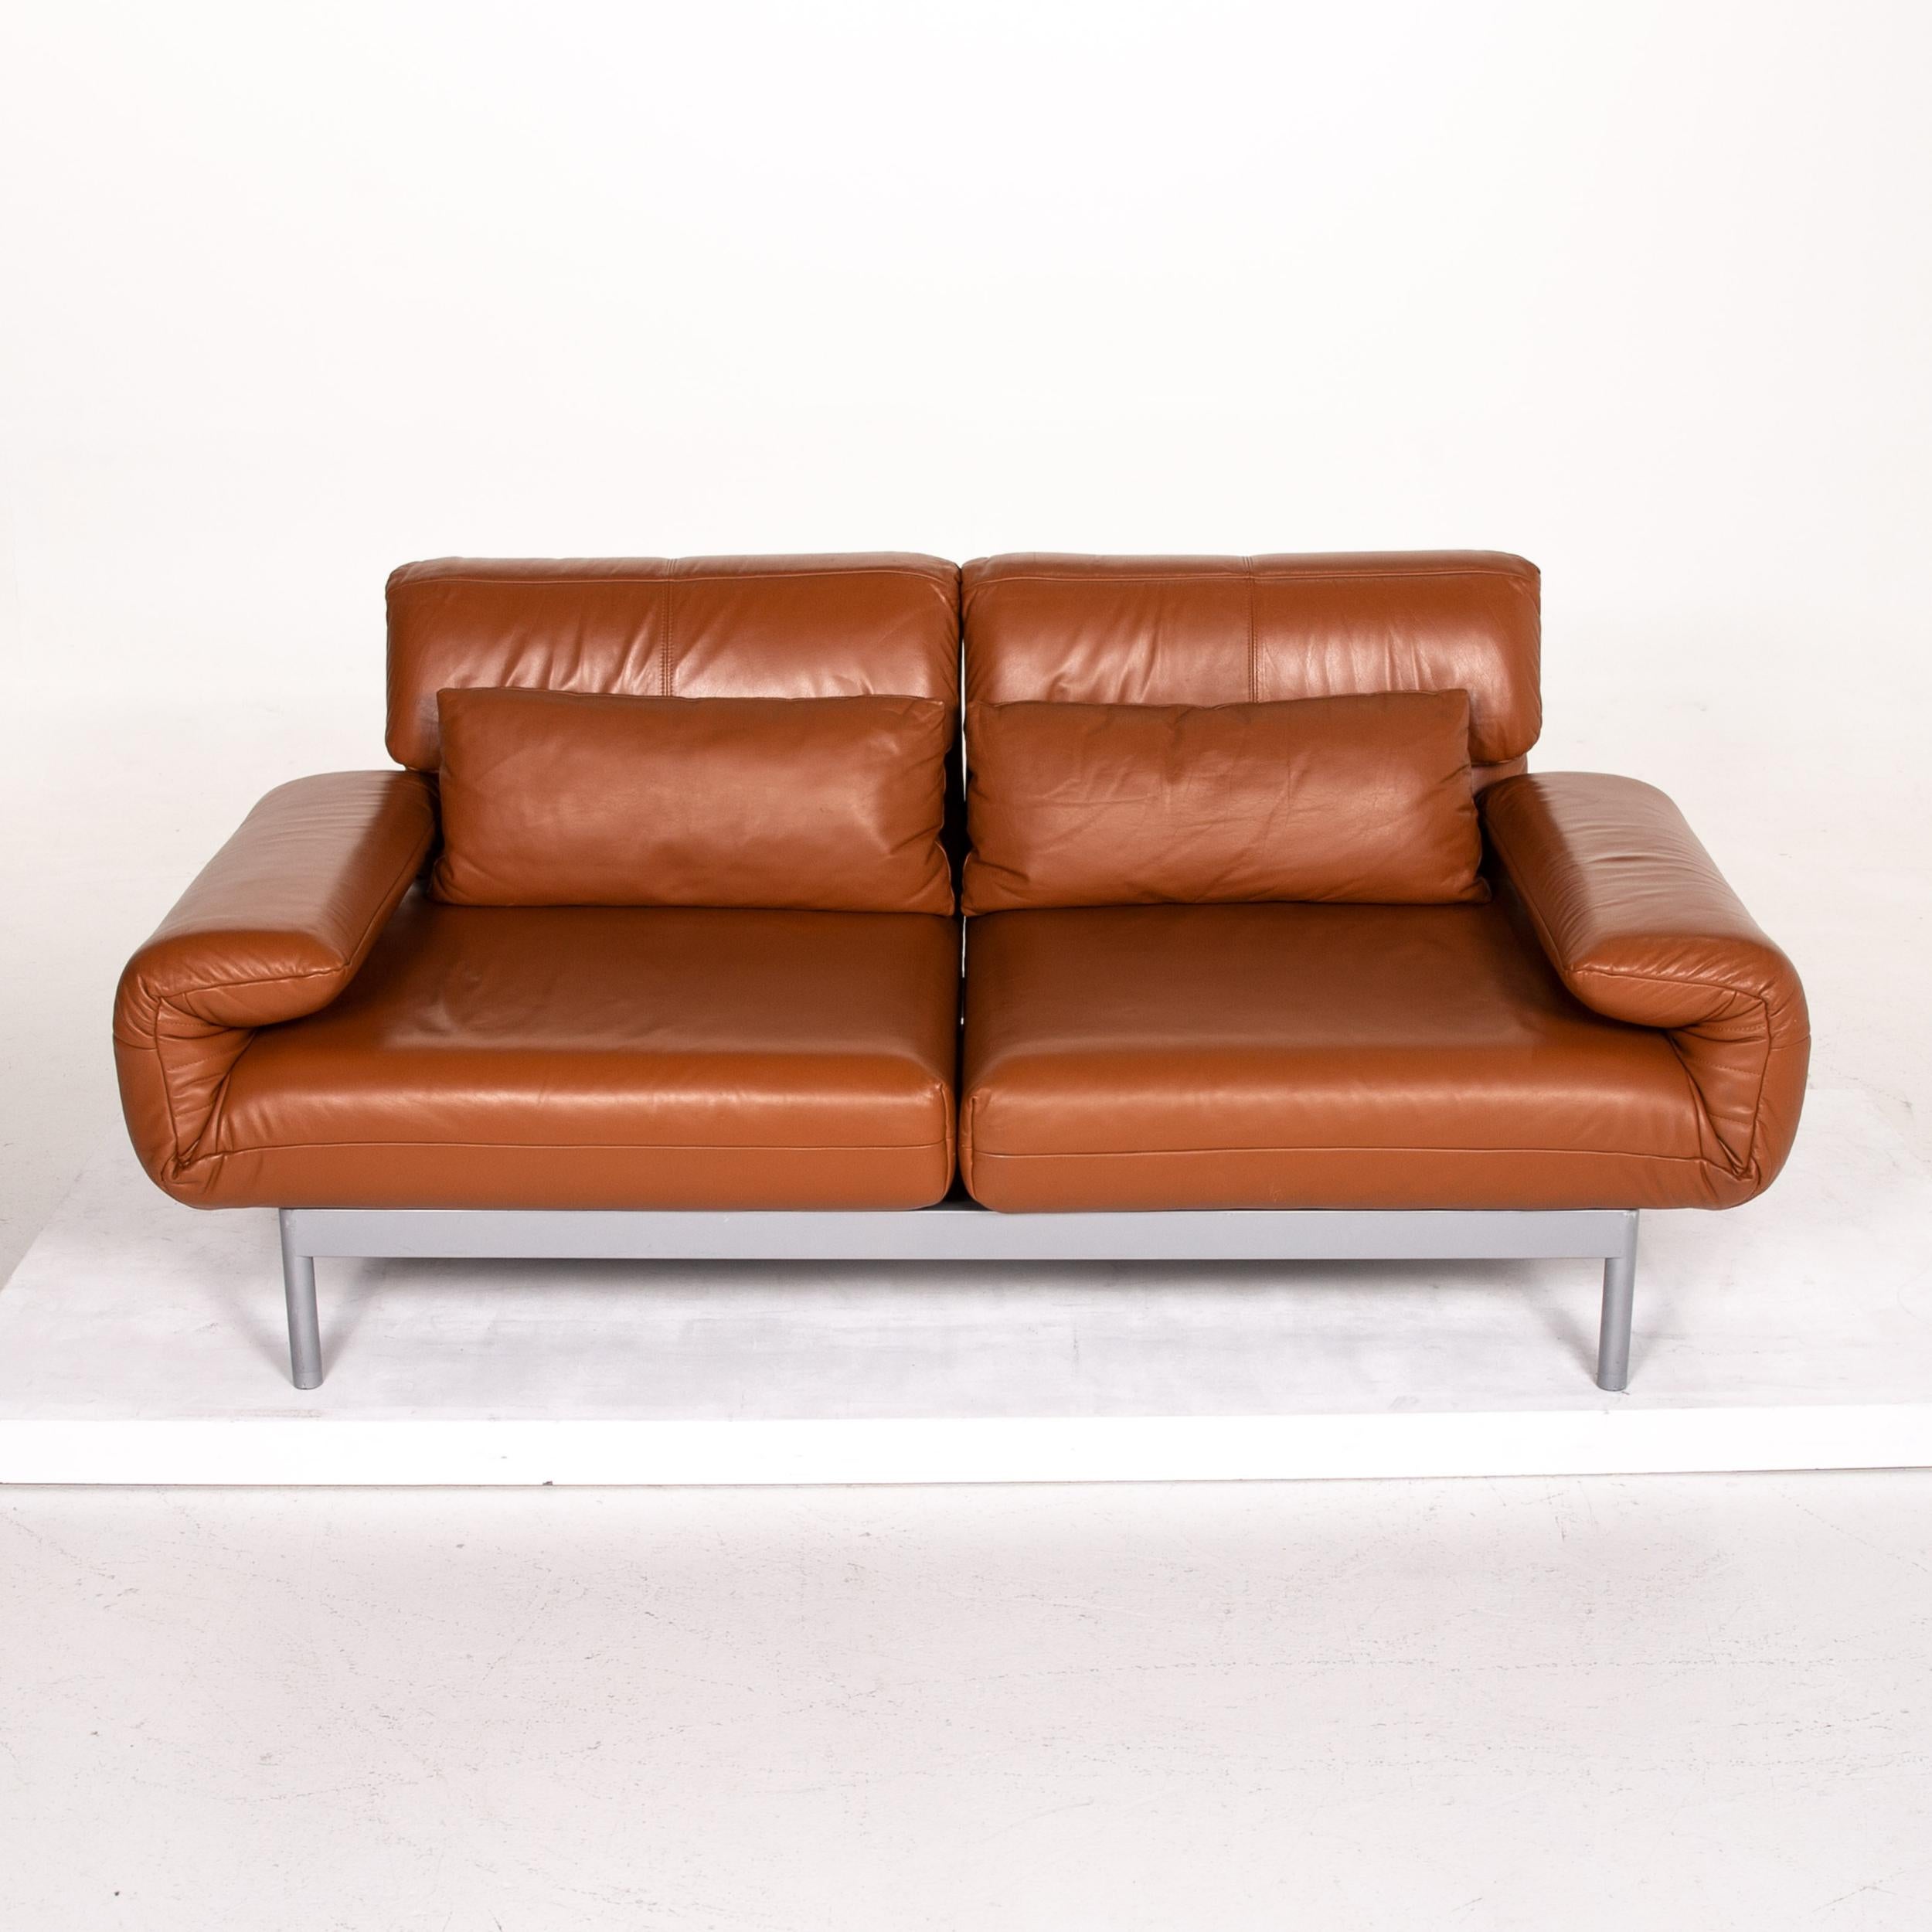 Rolf Benz Plura Leather Sofa Cognac Brown Two-Seat Function Relax Function 1